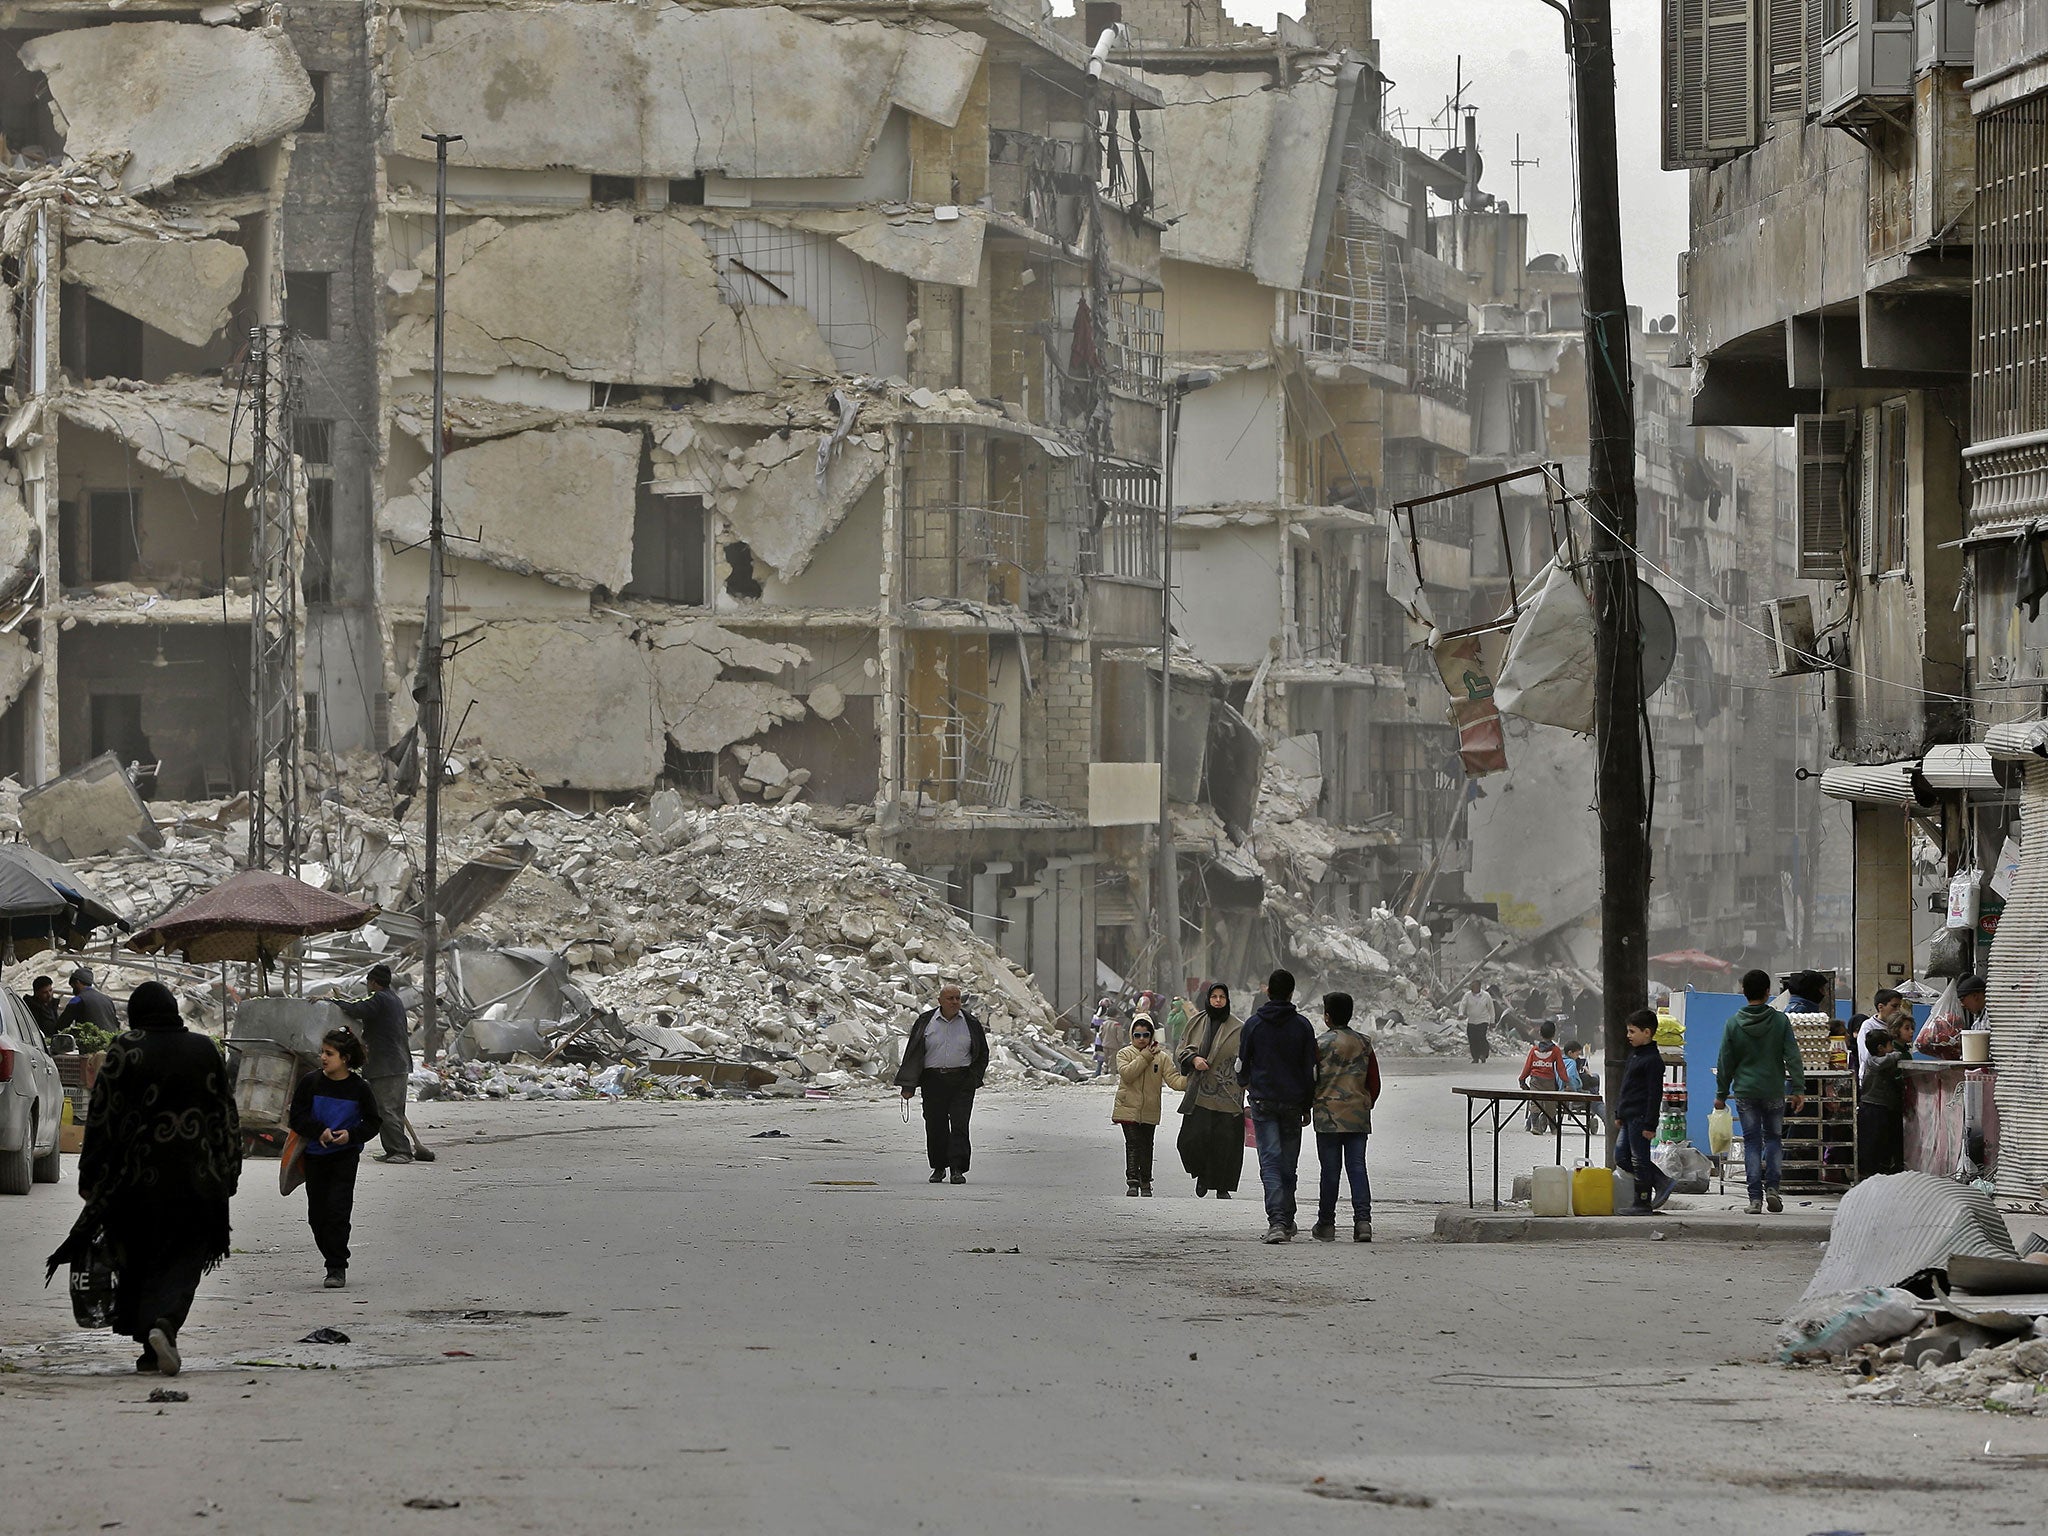 Residents in the formerly rebel-held al-Shaar district of Aleppo on 9 March 2017